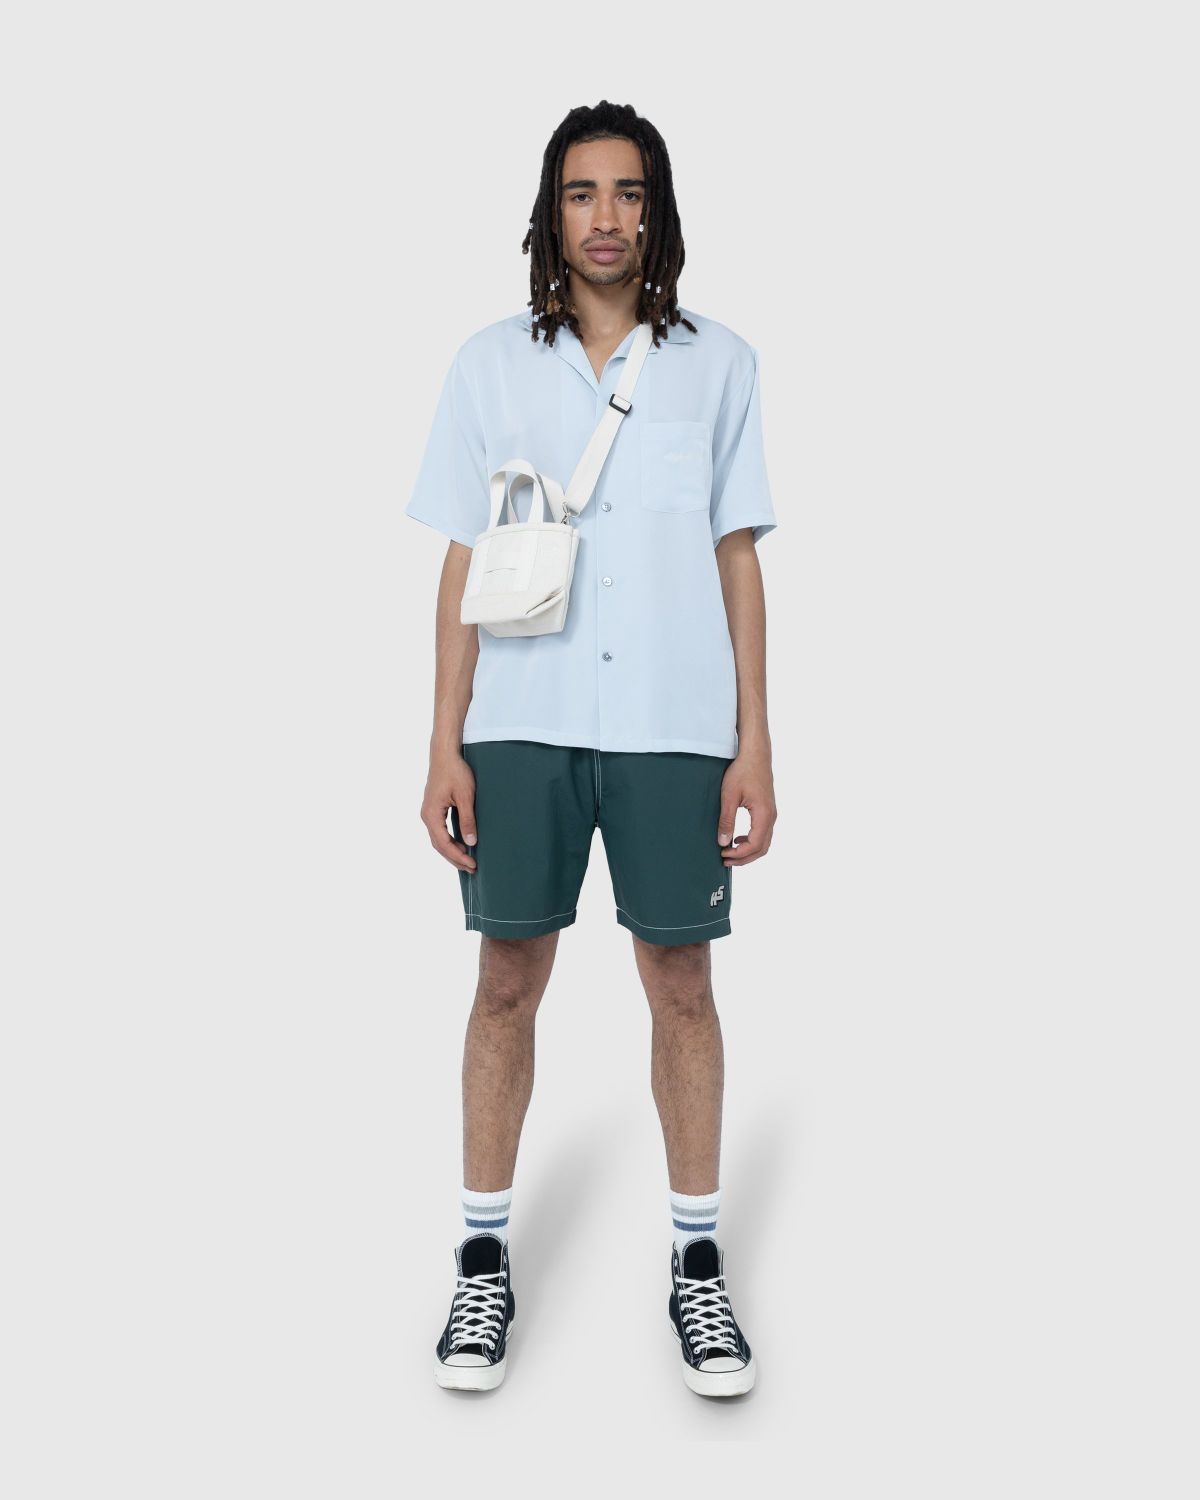 Highsnobiety – Contrast Brushed Nylon Water Shorts Green - Active Shorts - Green - Image 7